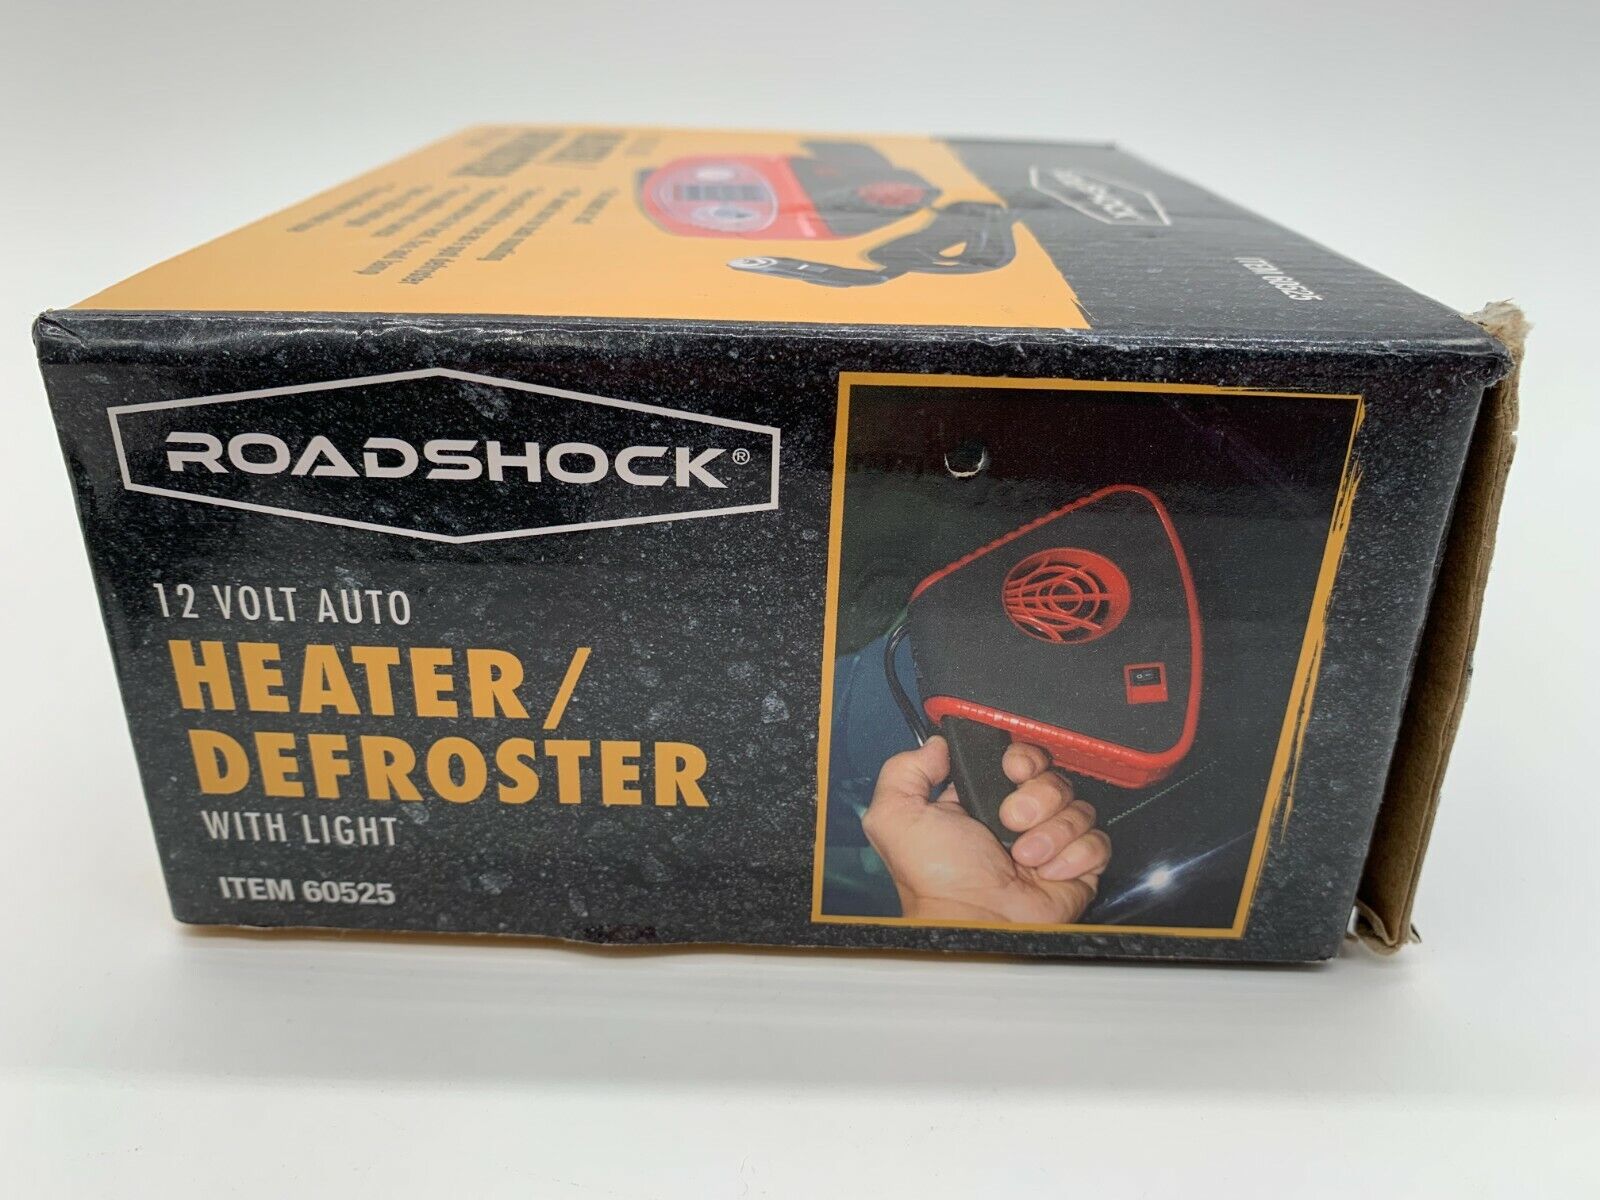 Hft 12 Volt Auto Heater/Defroster with Light